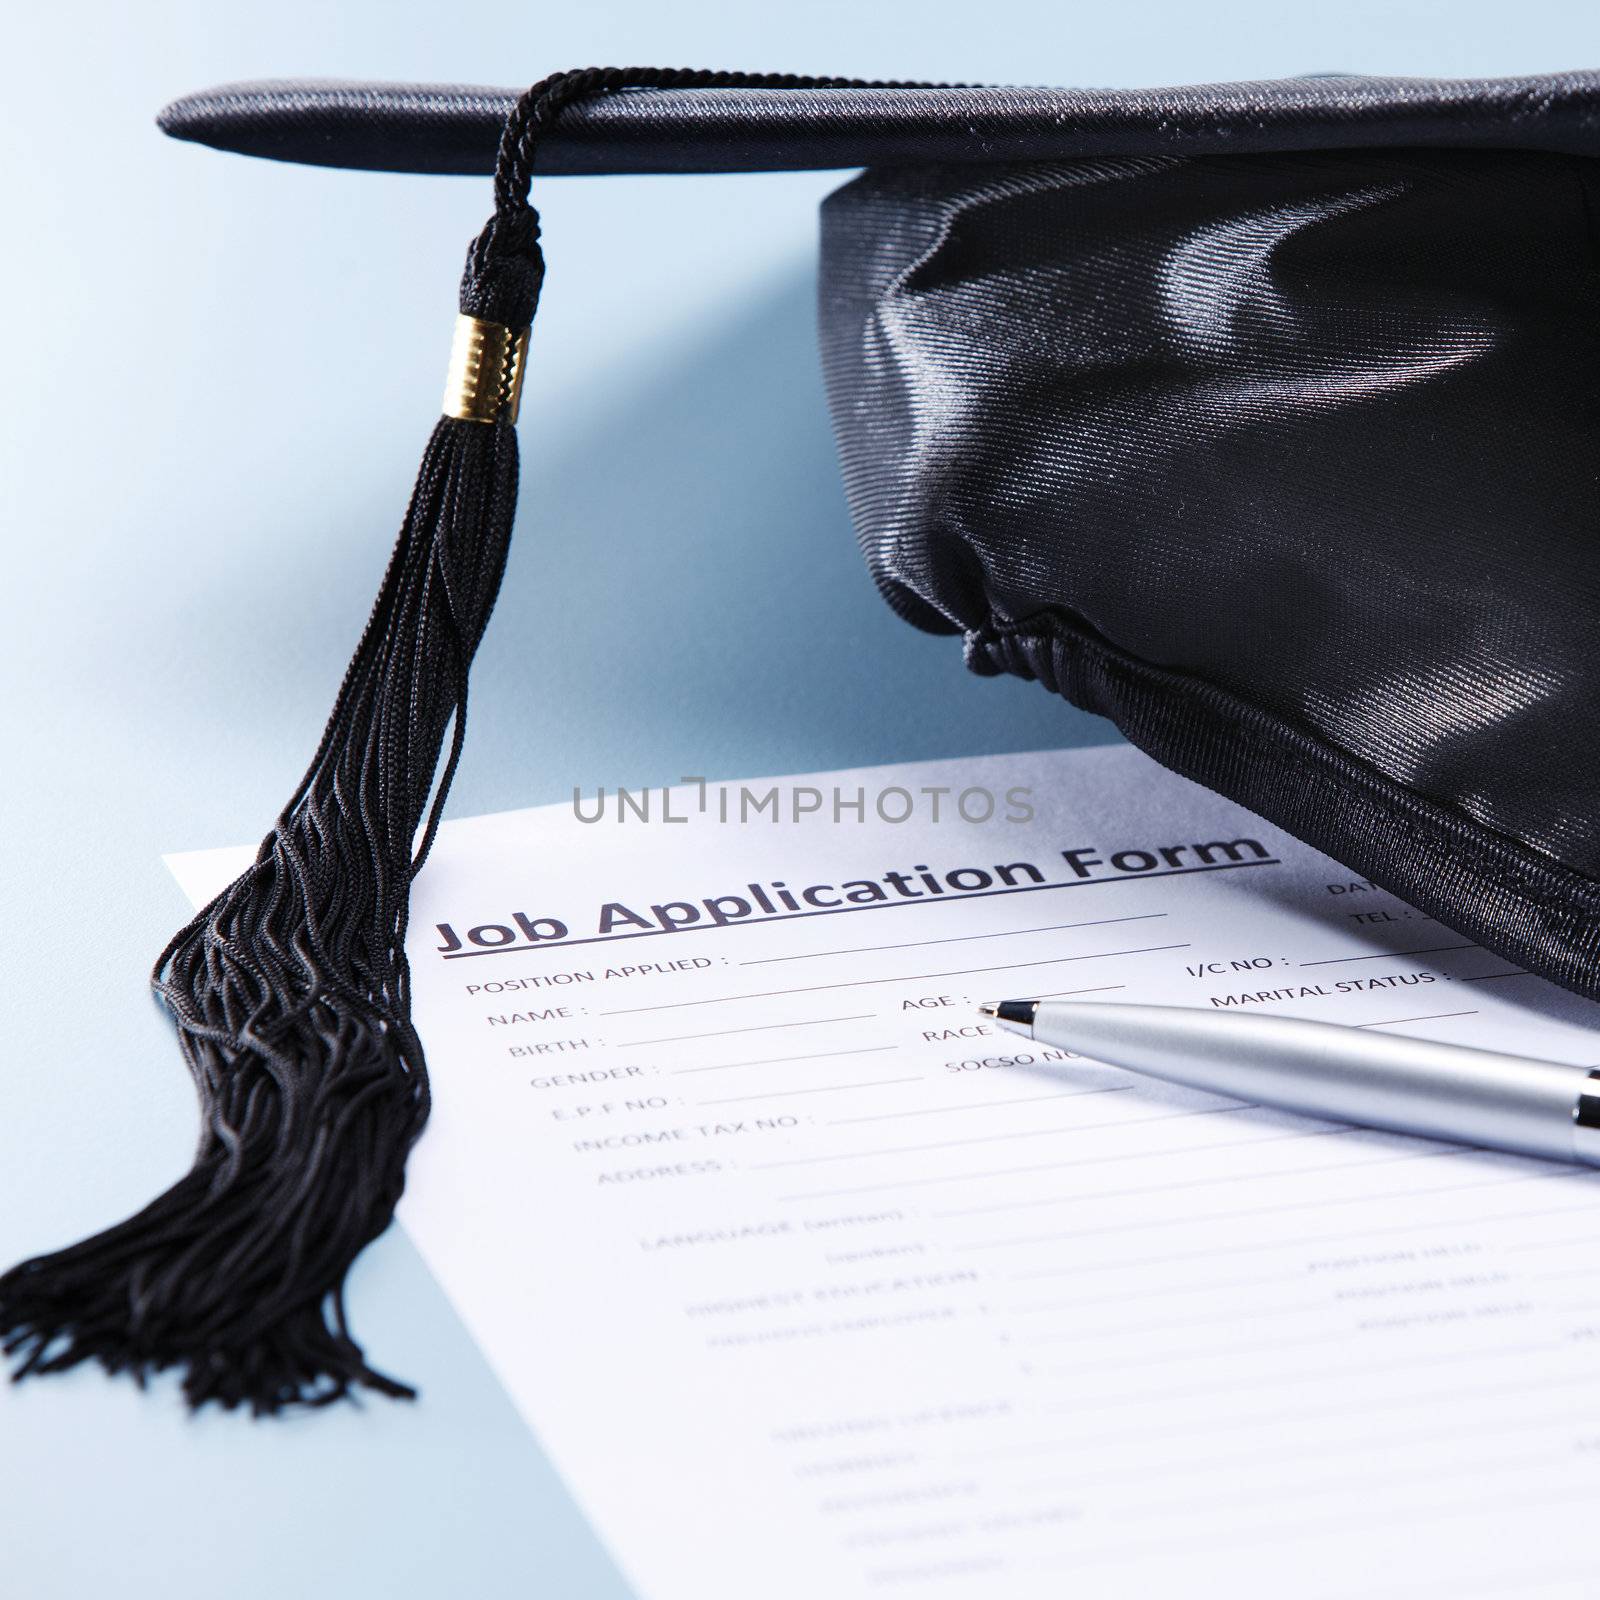 stock image of the mortar board and job application form